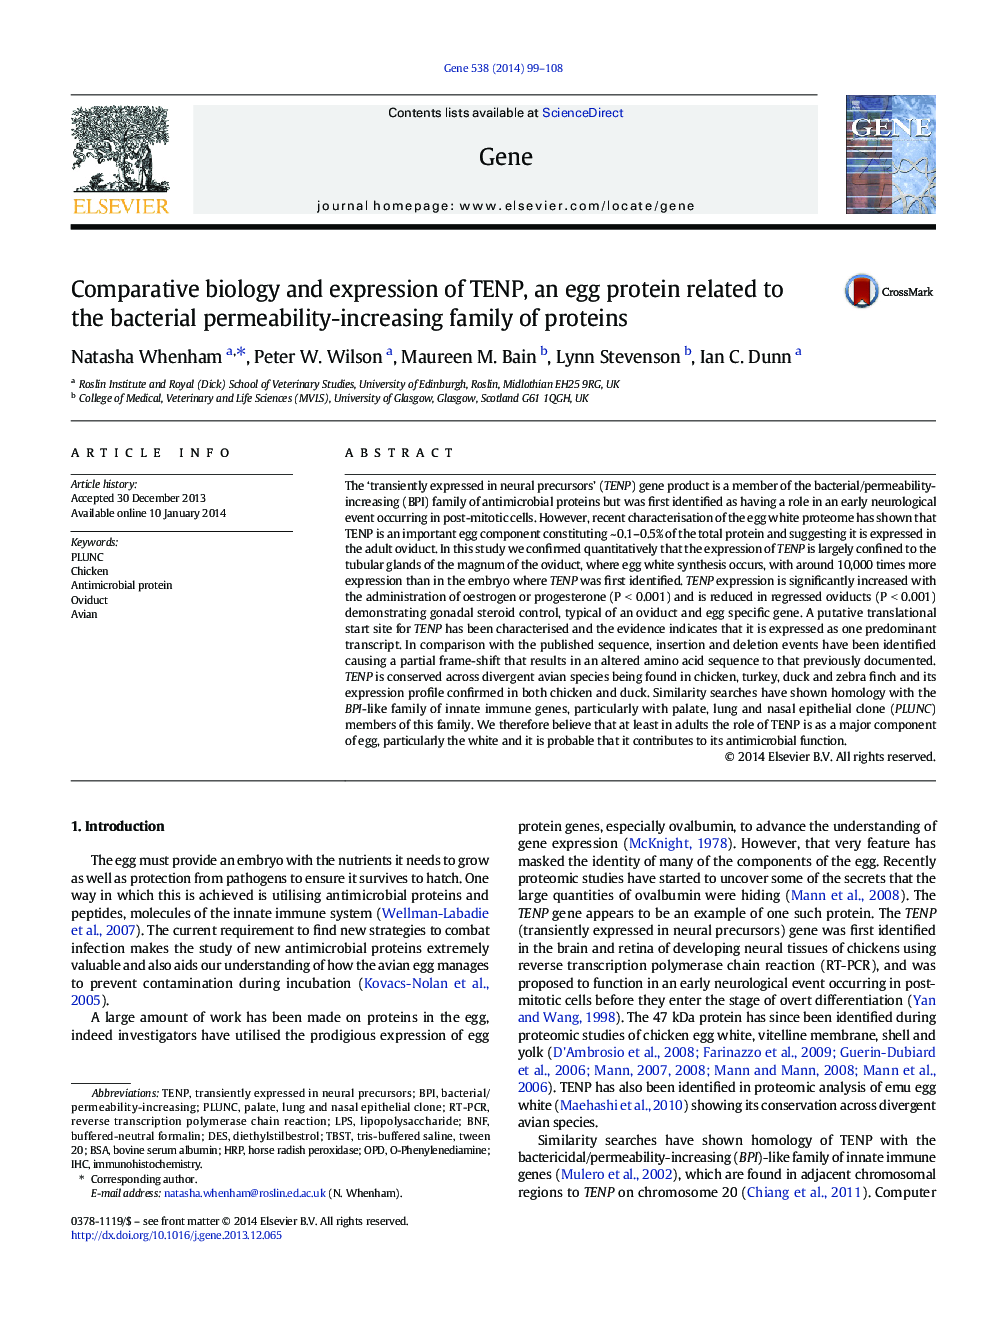 Comparative biology and expression of TENP, an egg protein related to the bacterial permeability-increasing family of proteins